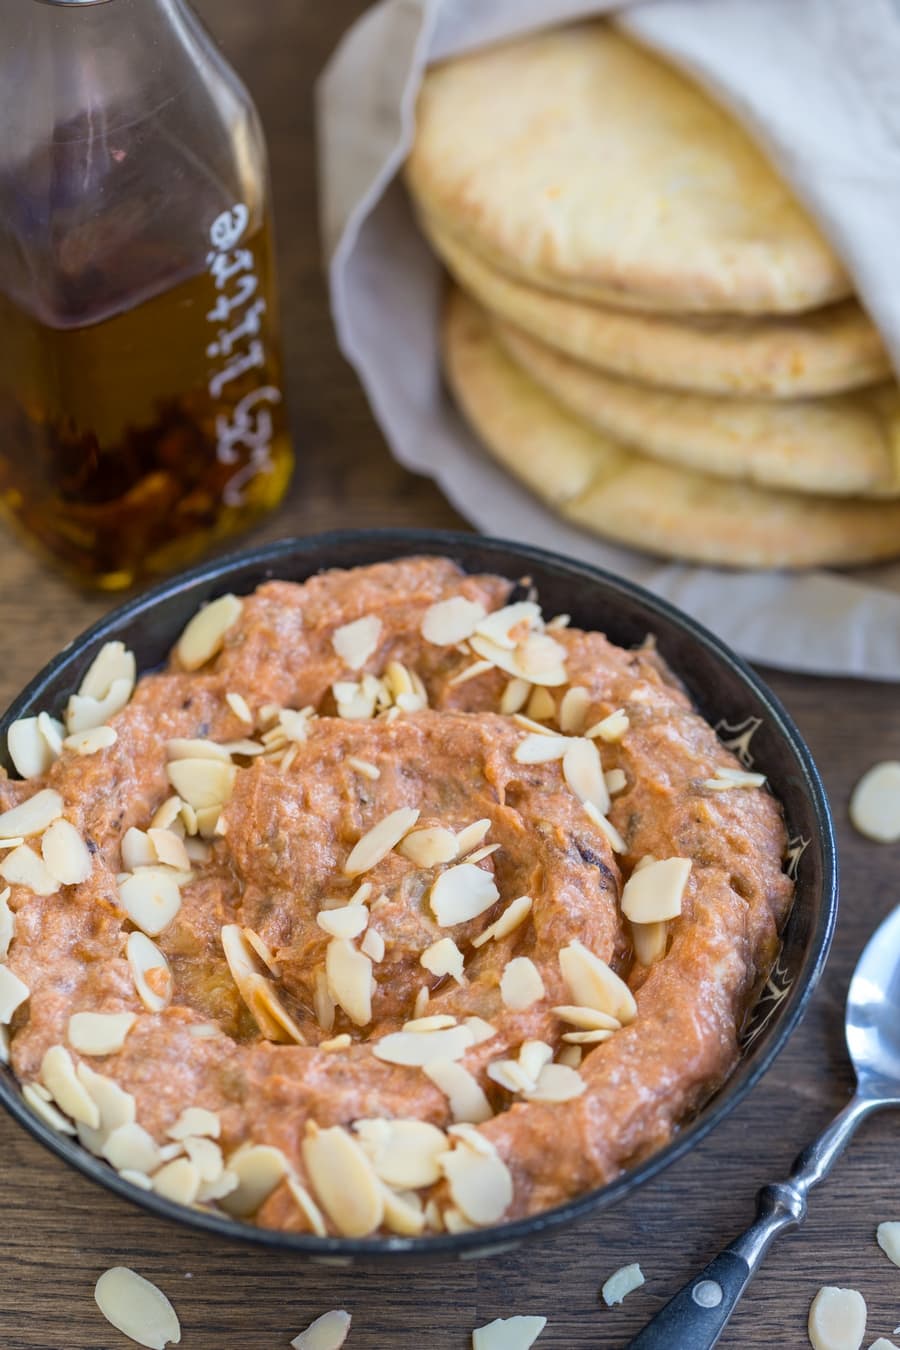 Eggplant ricotta dip garnished with roasted shaved almonds. Chili oil bottle and pita bread in the background.